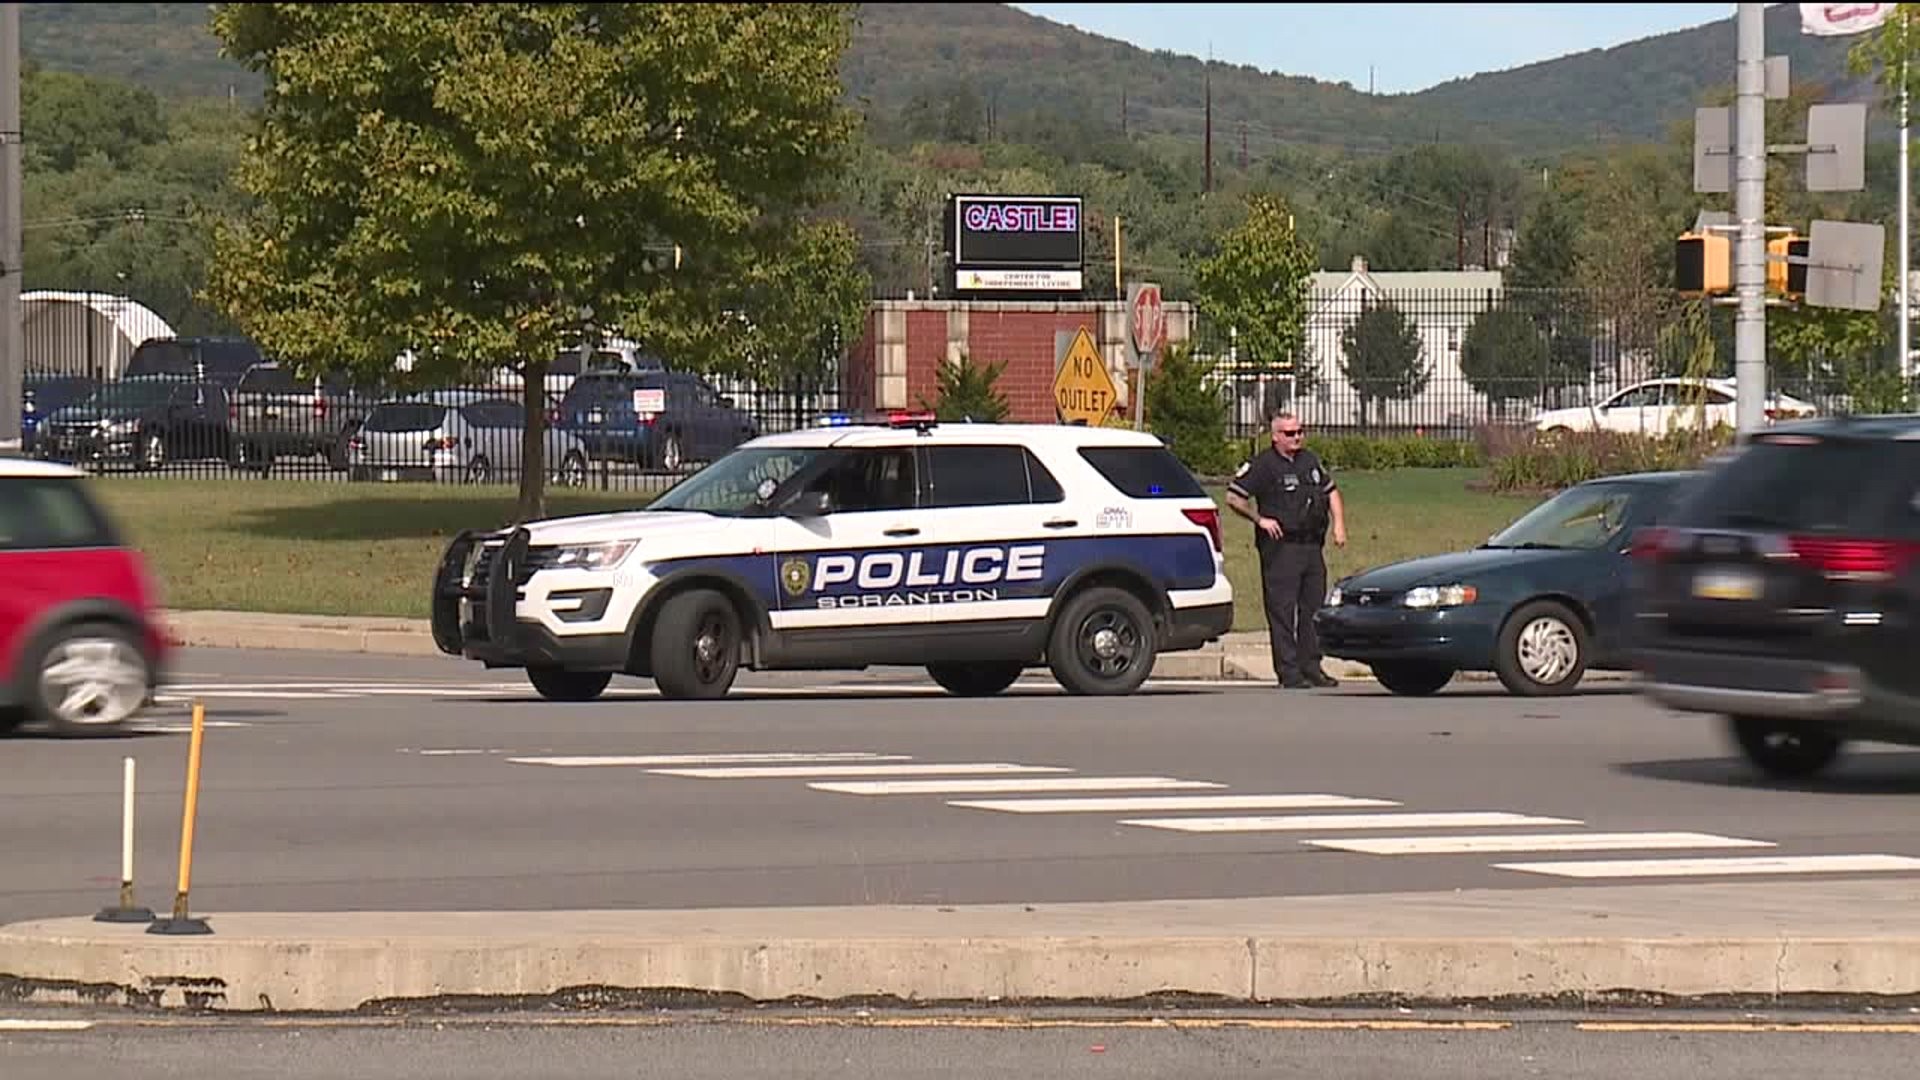 Another Day of Threats at Scranton High Schools